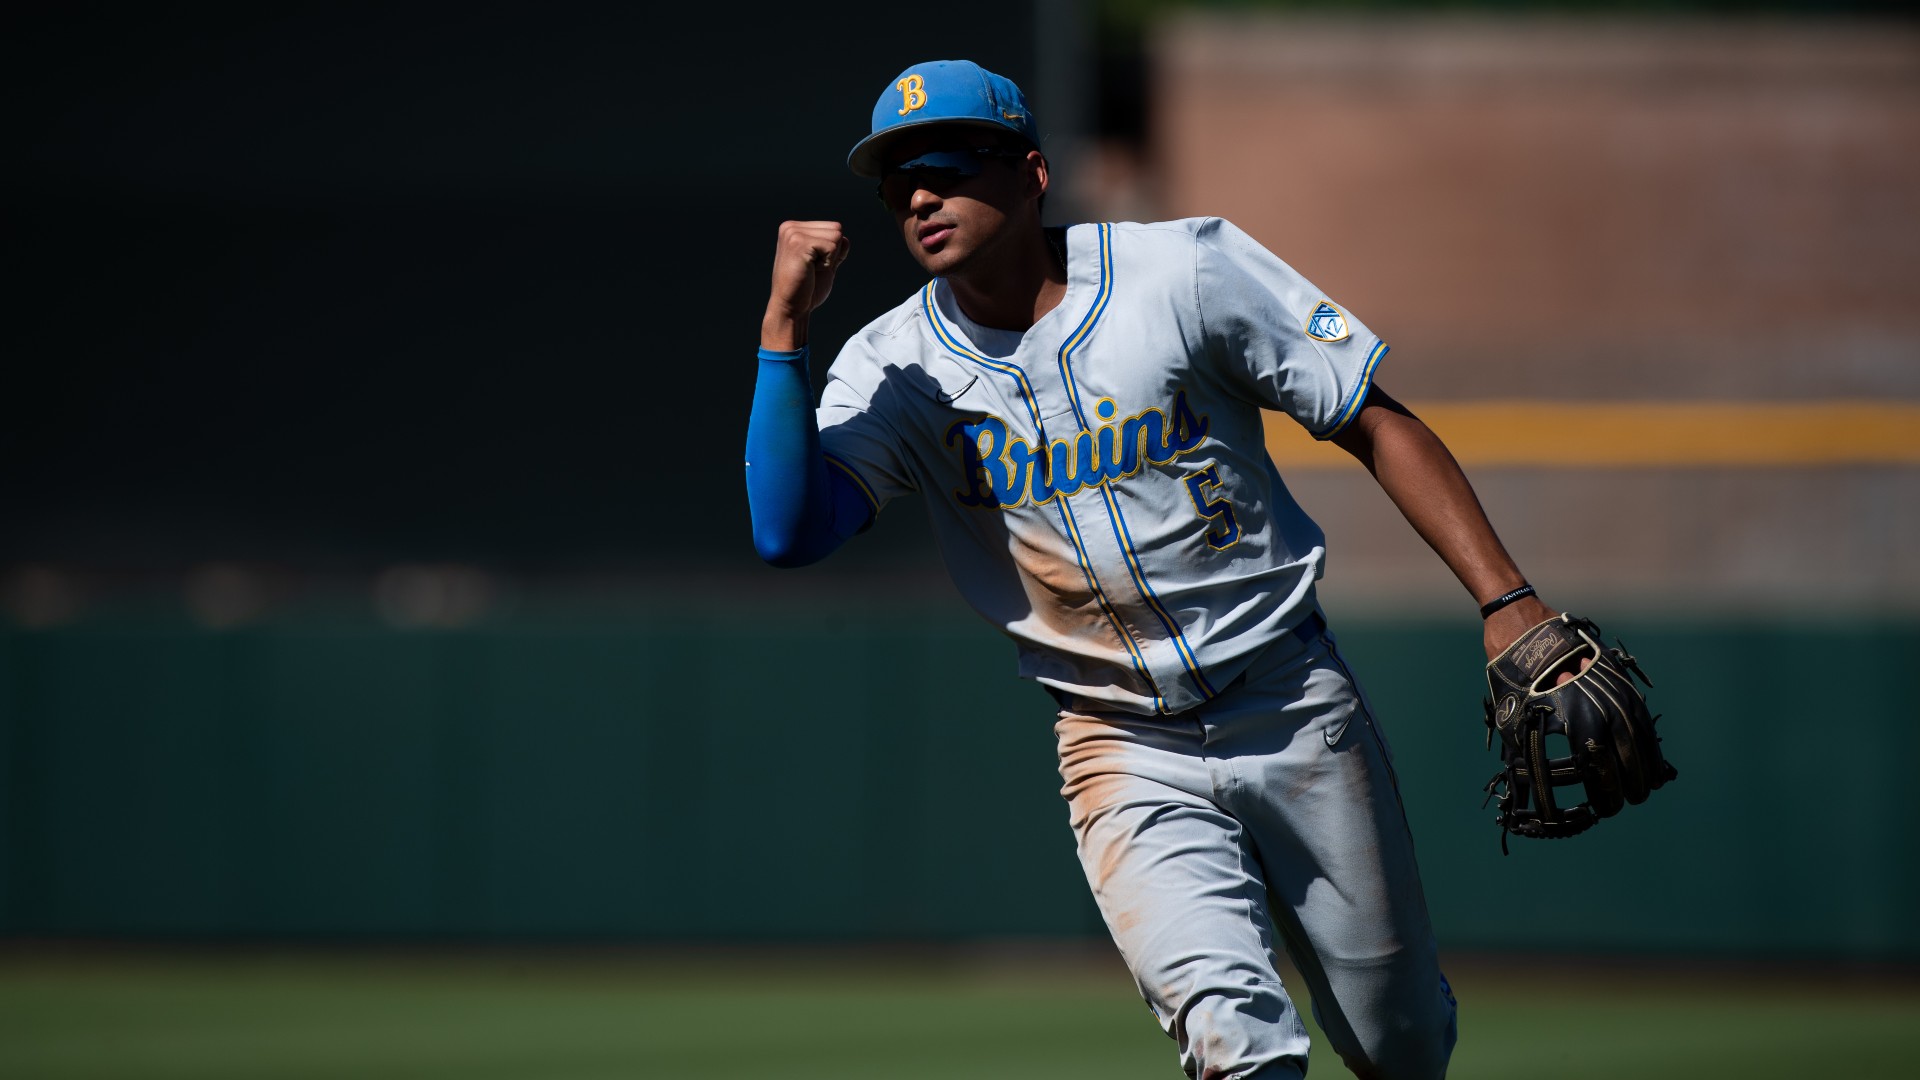 Auburn NCAA Regional Odds & Picks: How to Bet UCLA in College Baseball article feature image